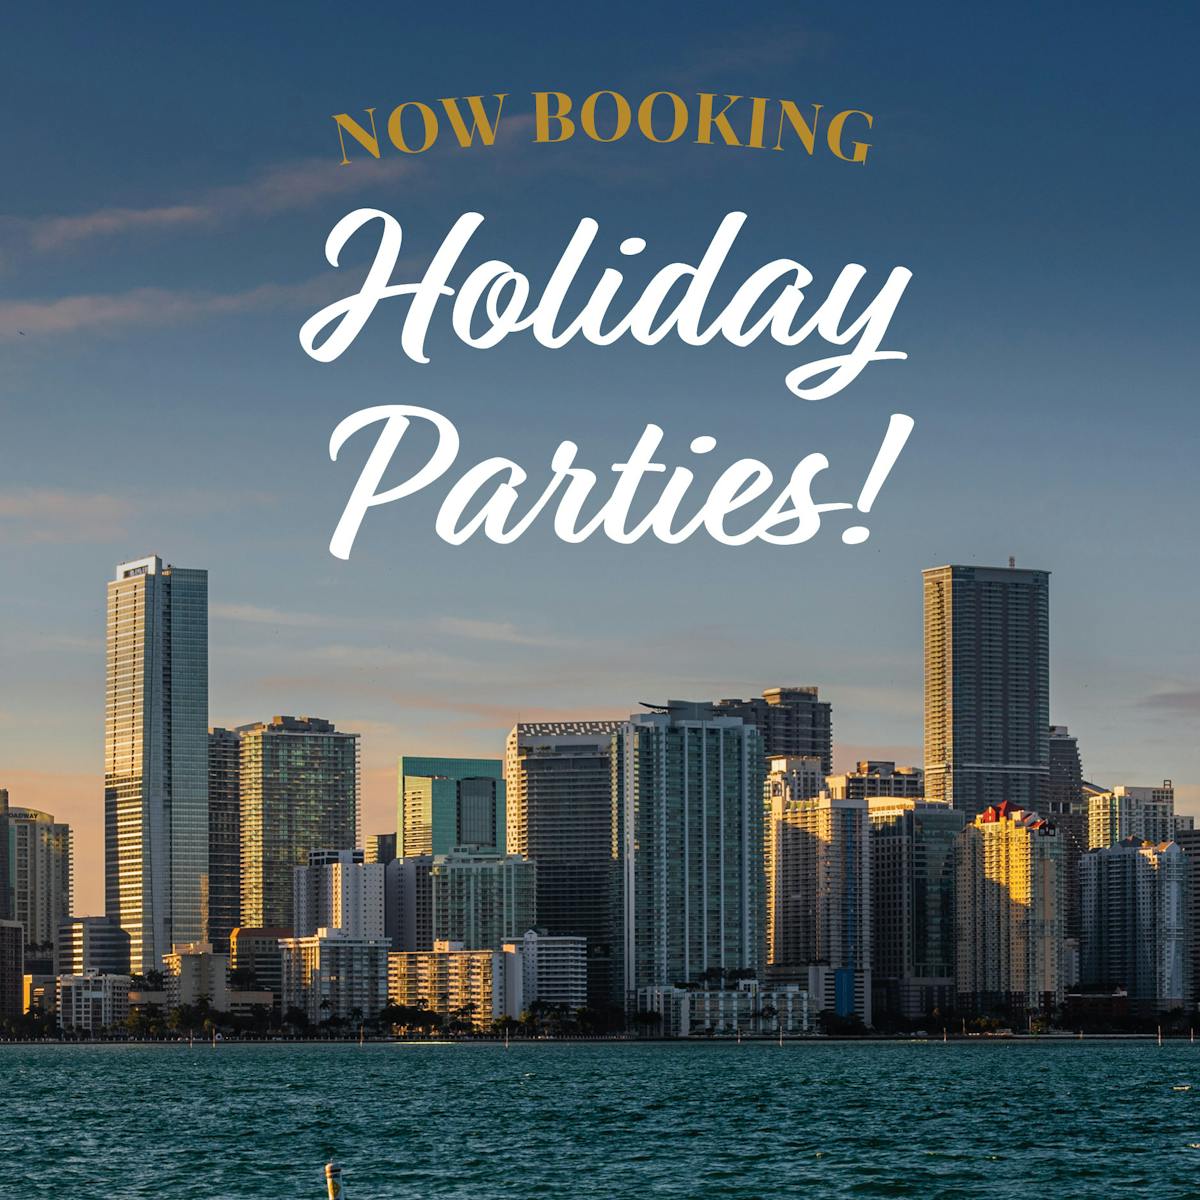 miami skyline now booking holiday parties